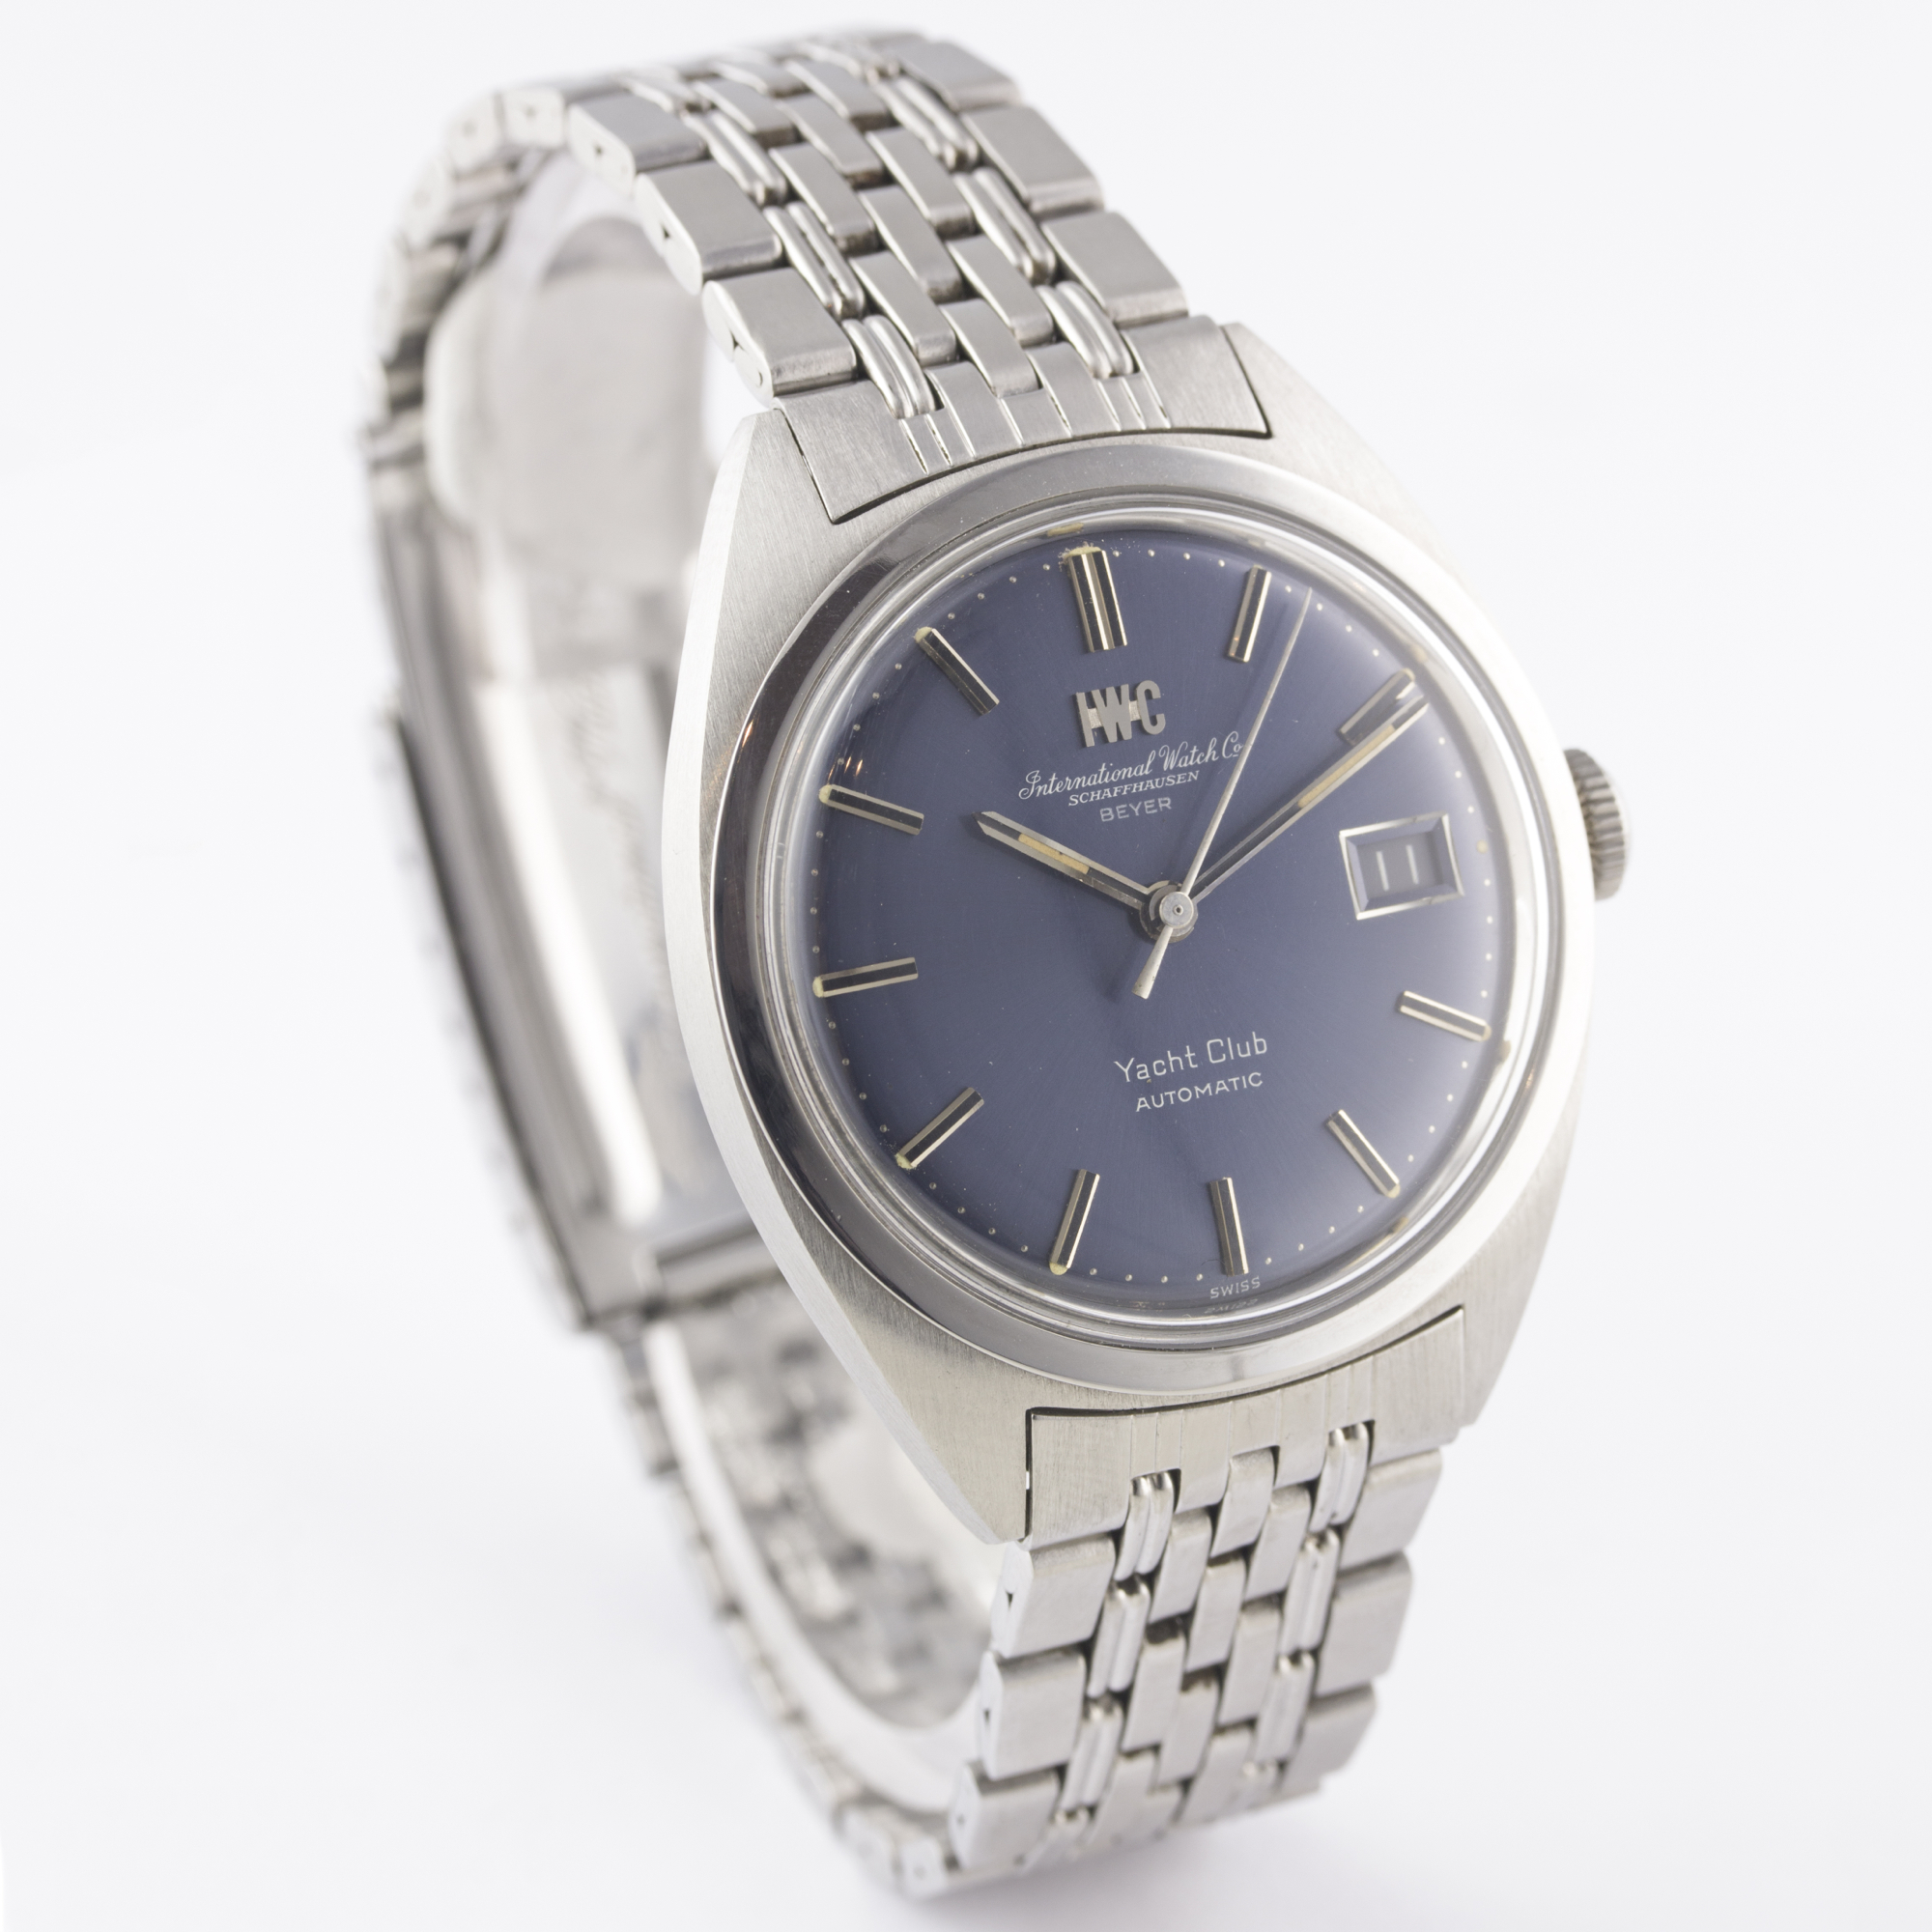 A RARE GENTLEMAN'S STAINLESS STEEL IWC YACHT CLUB AUTOMATIC BRACELET WATCH CIRCA 1971, REF. R811 - Image 5 of 11